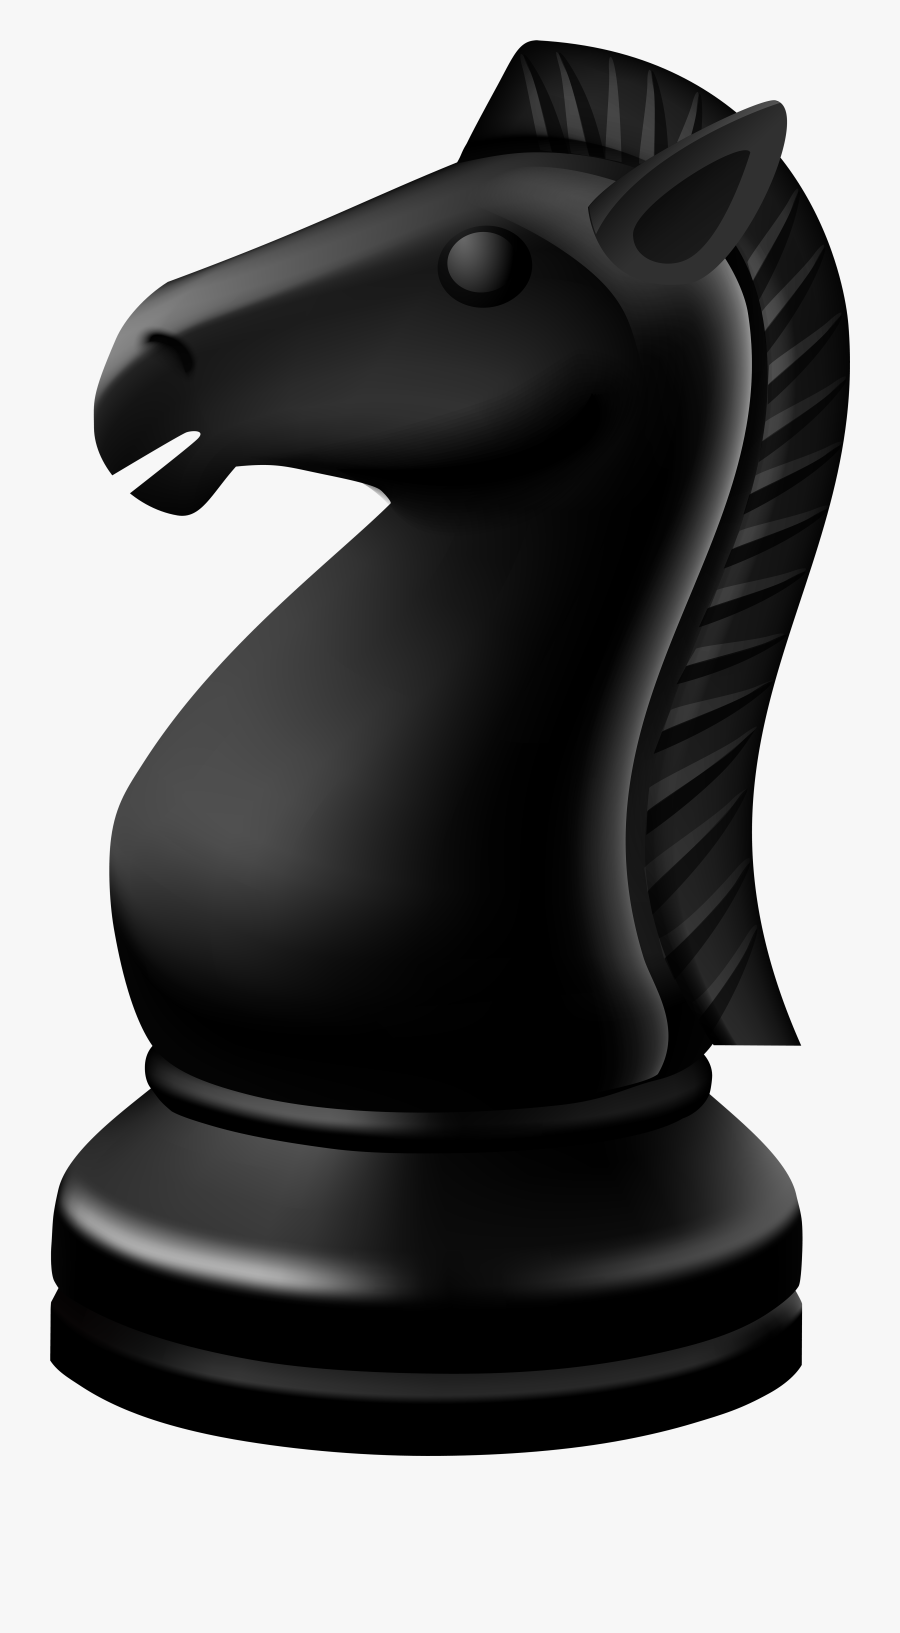 Knight Black Chess Piece Png Clip Art - Black Knight Chess Piece, Transparent Clipart